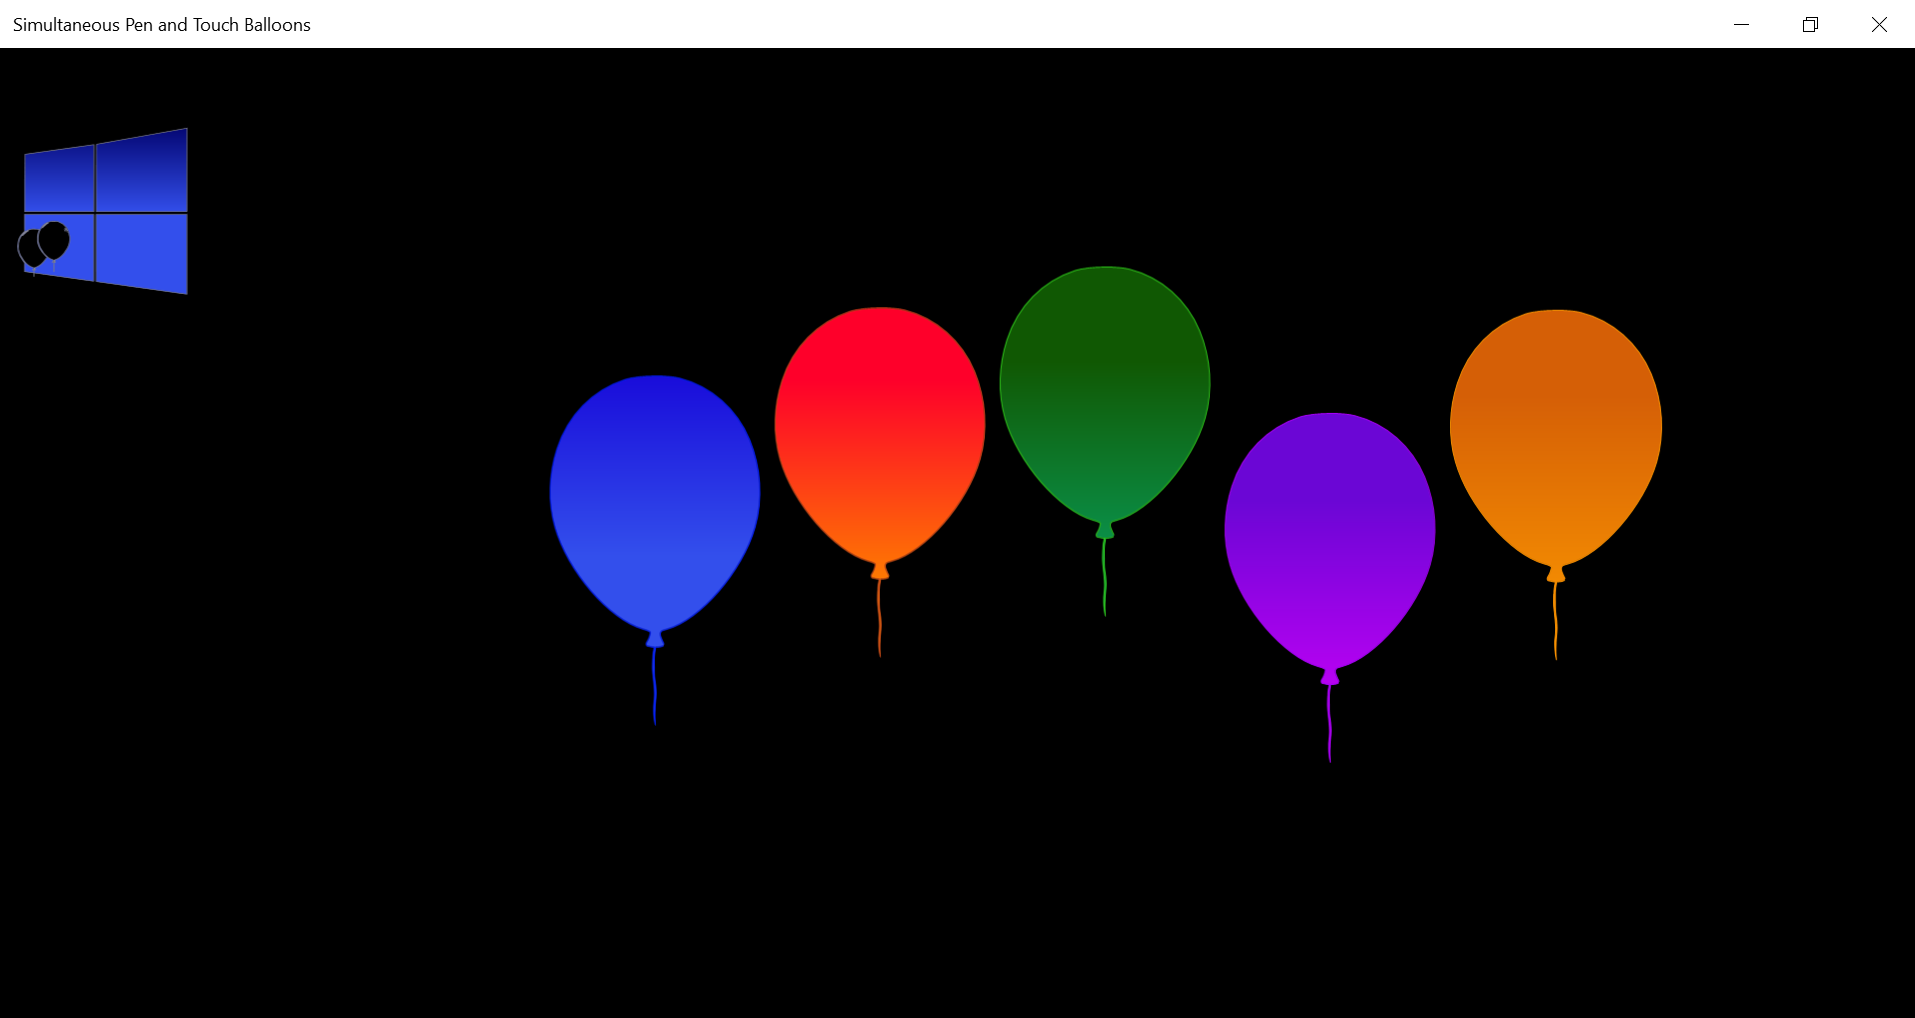 Simultaneous Pen and Touch Balloons